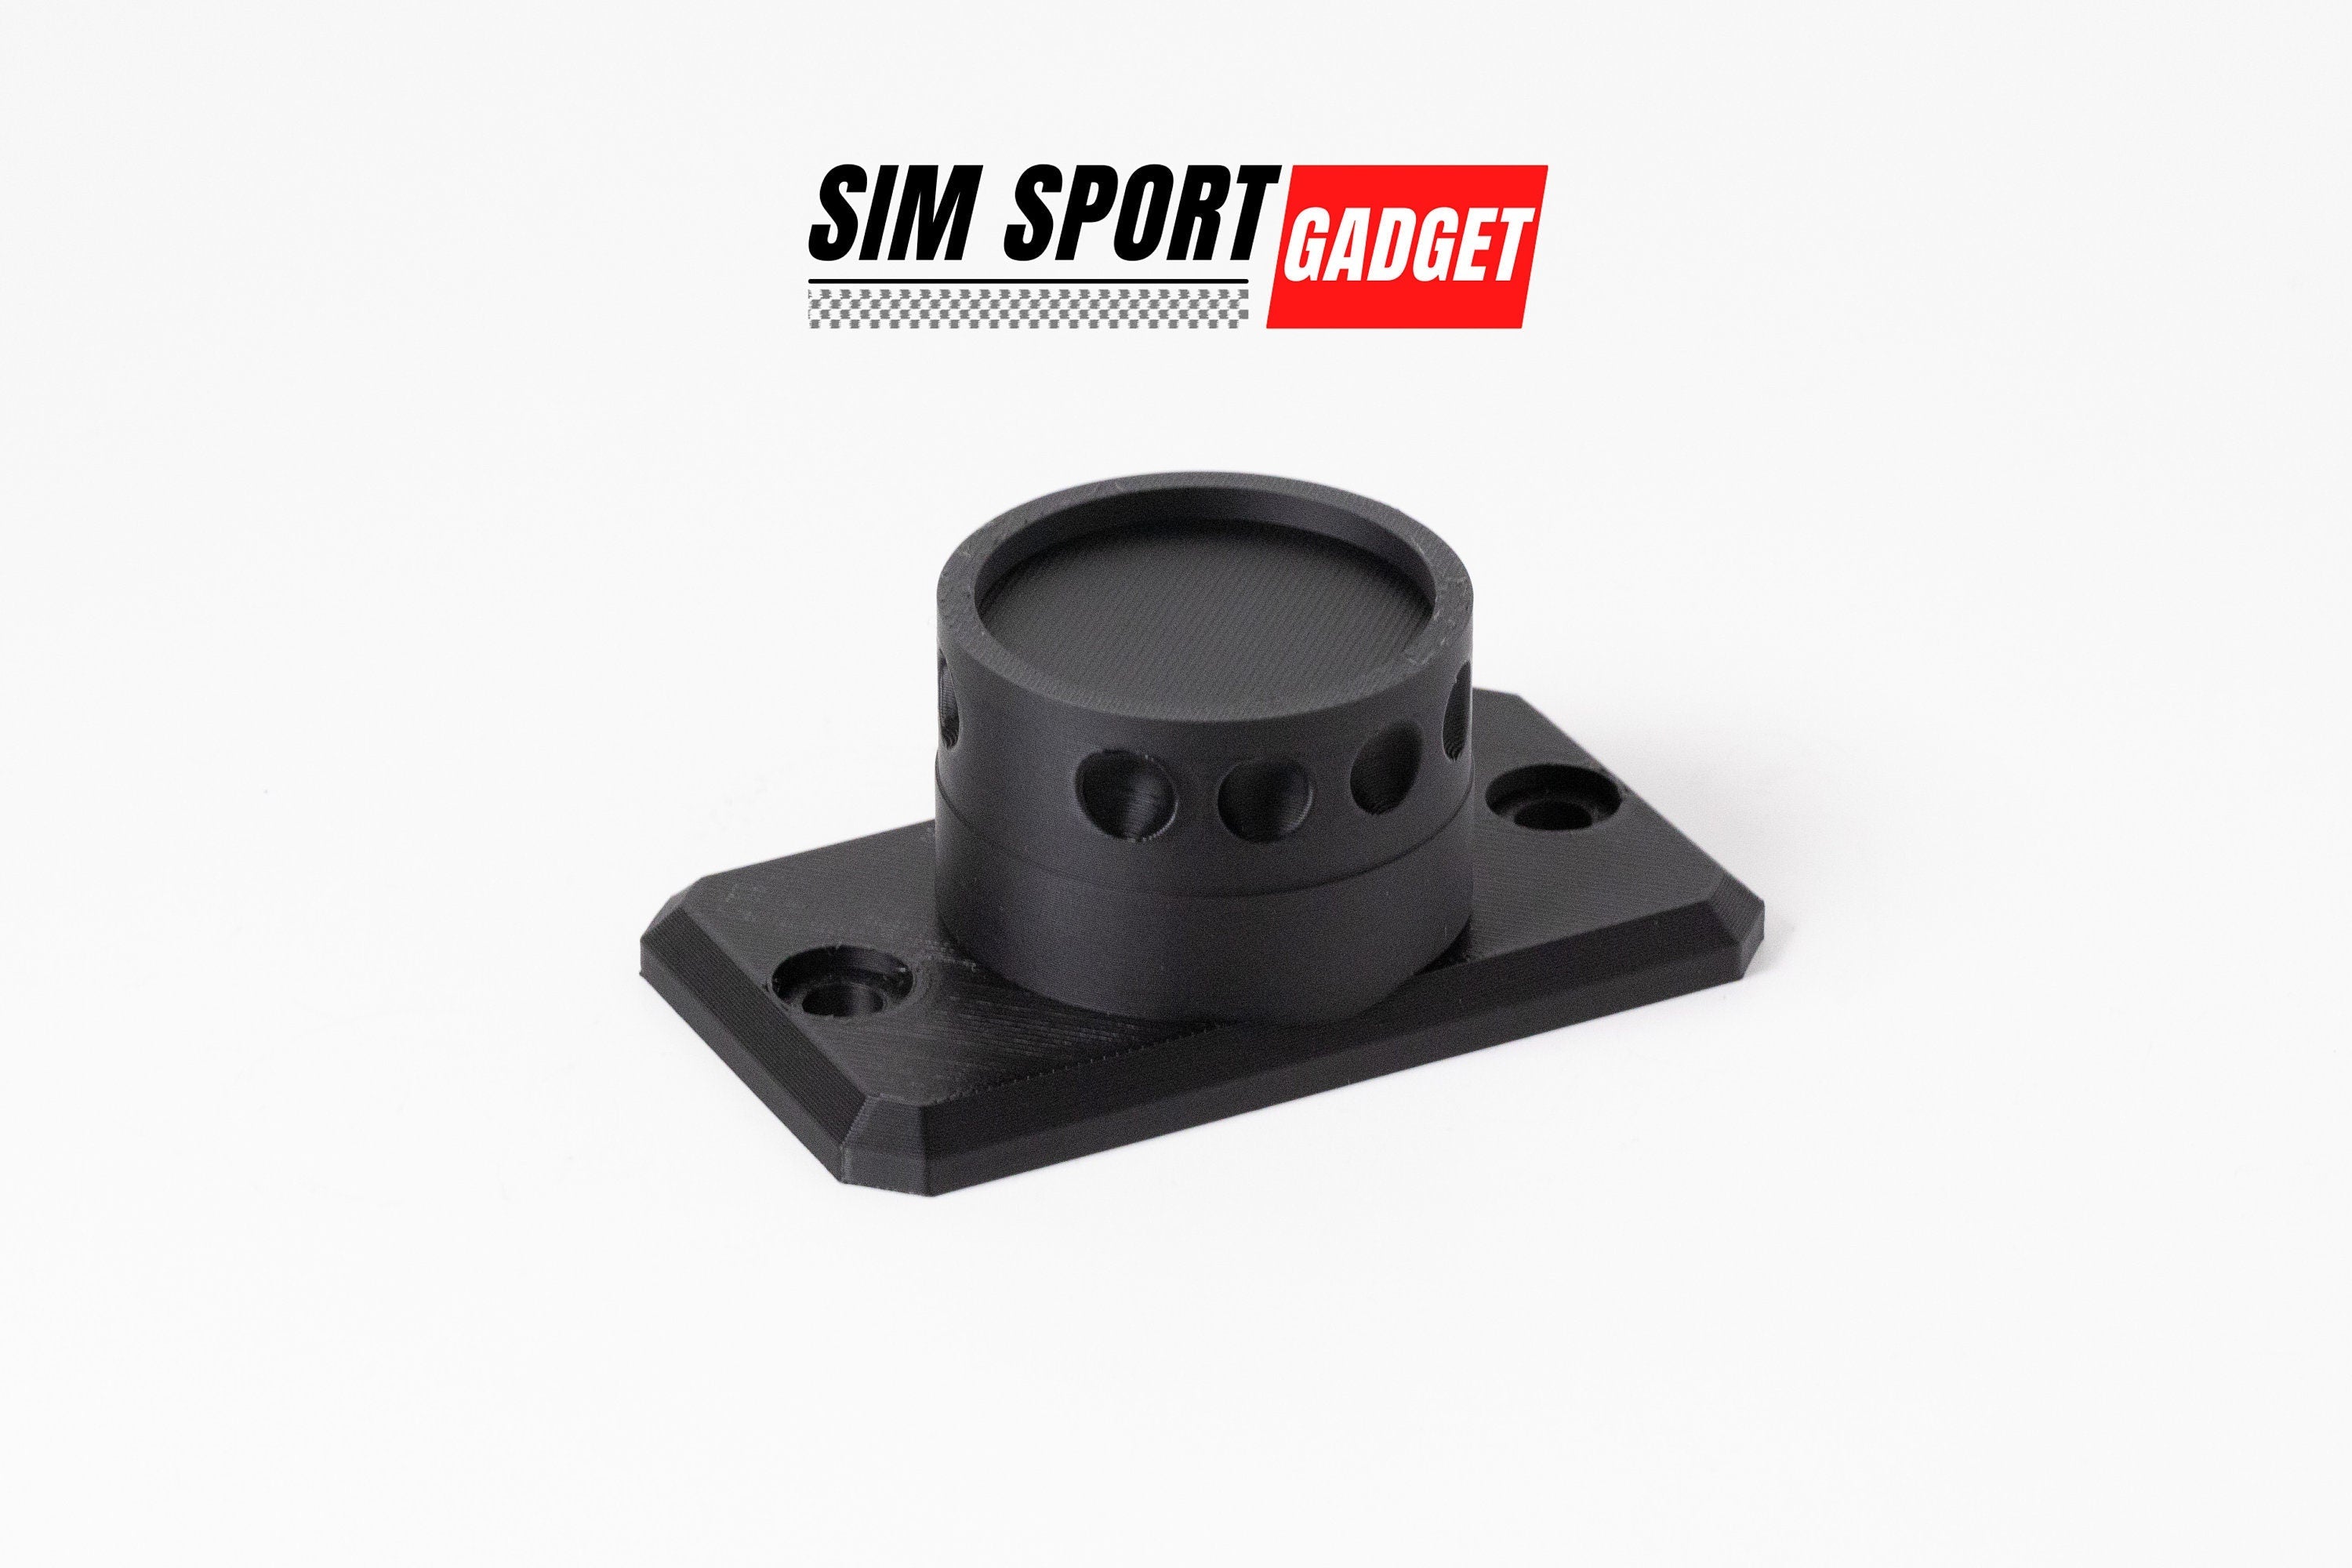 Wall Mount for Simagic Quick Release